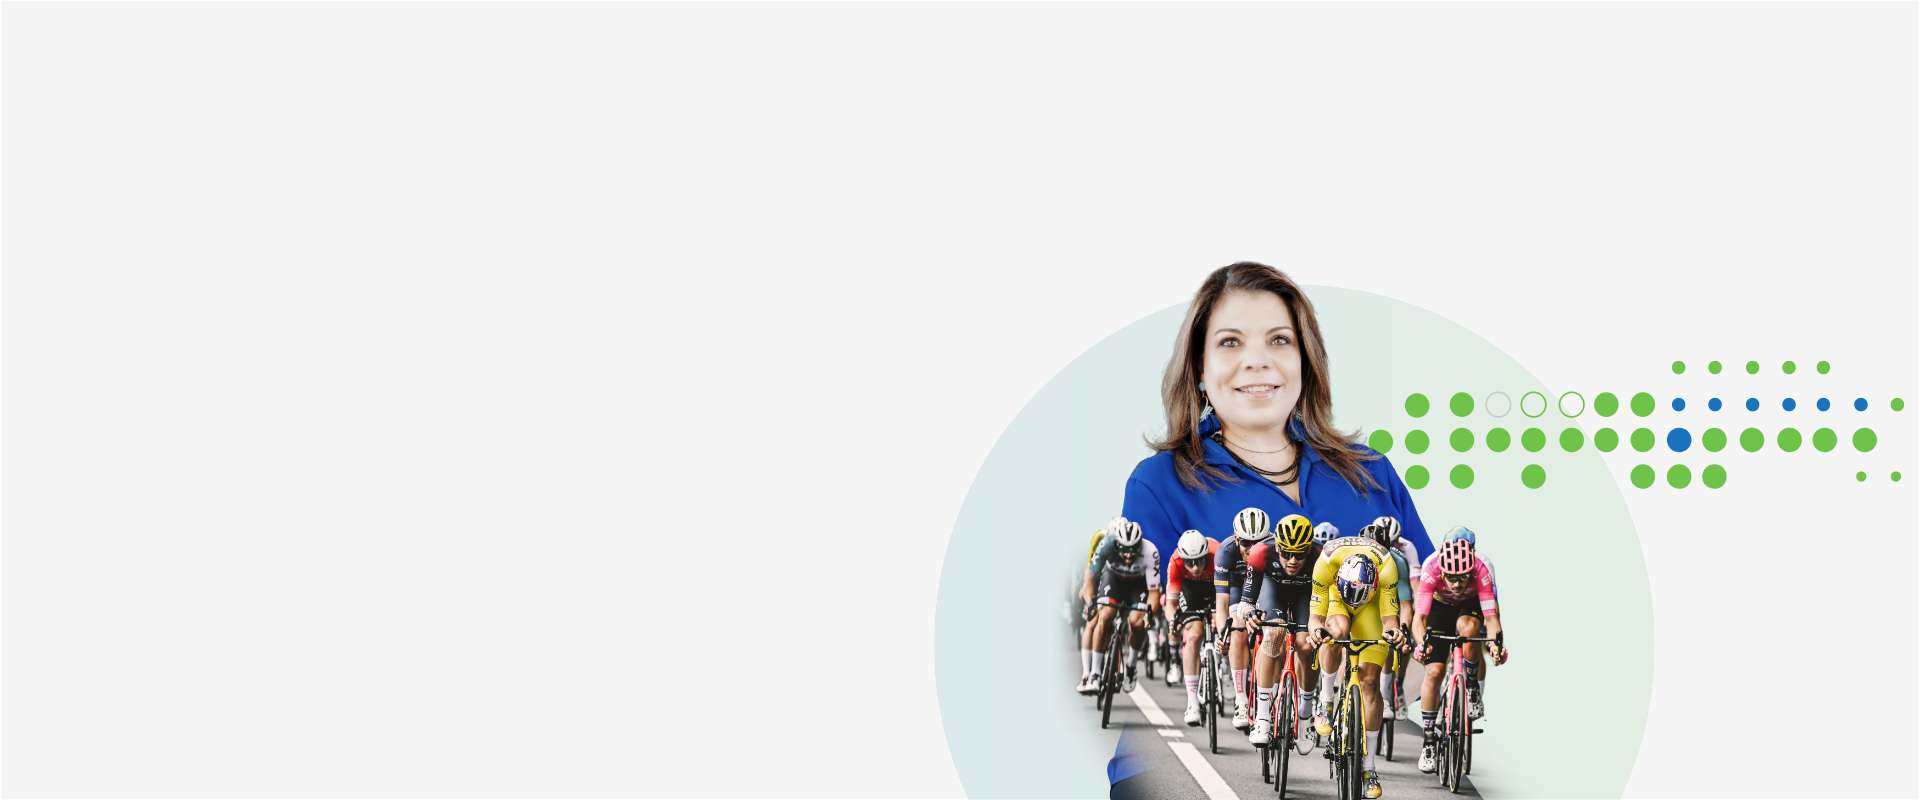 A banner image with a woman and cyclist on the road